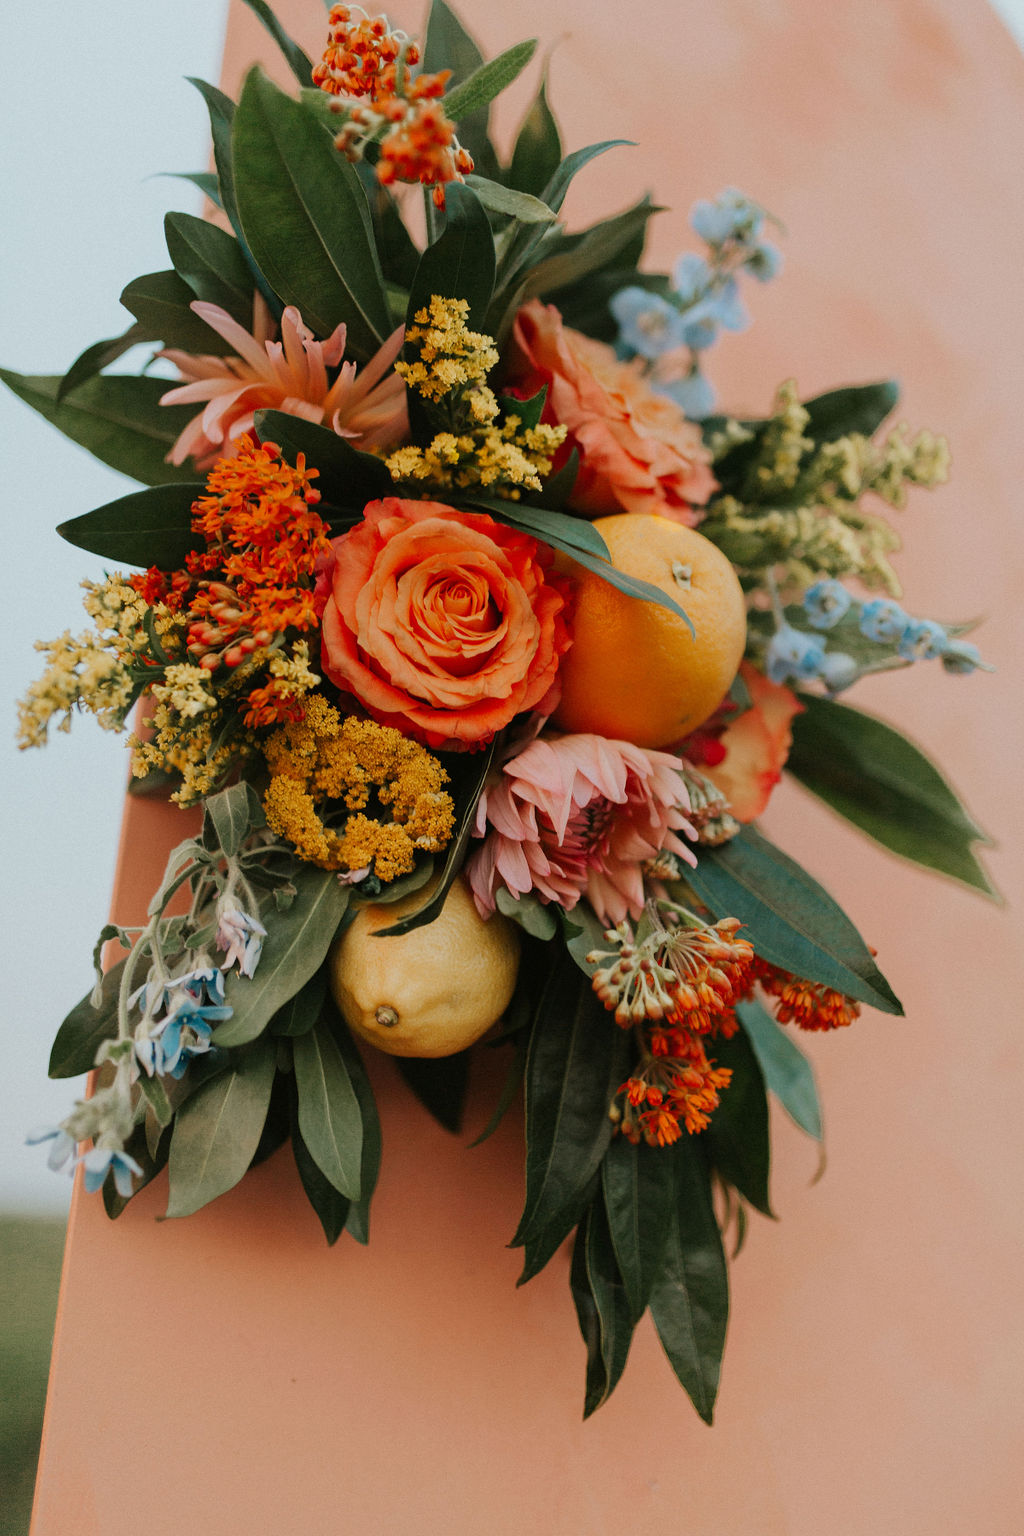 Tangerine inspired floral arrangement attached to a painted wooden panel backdrop